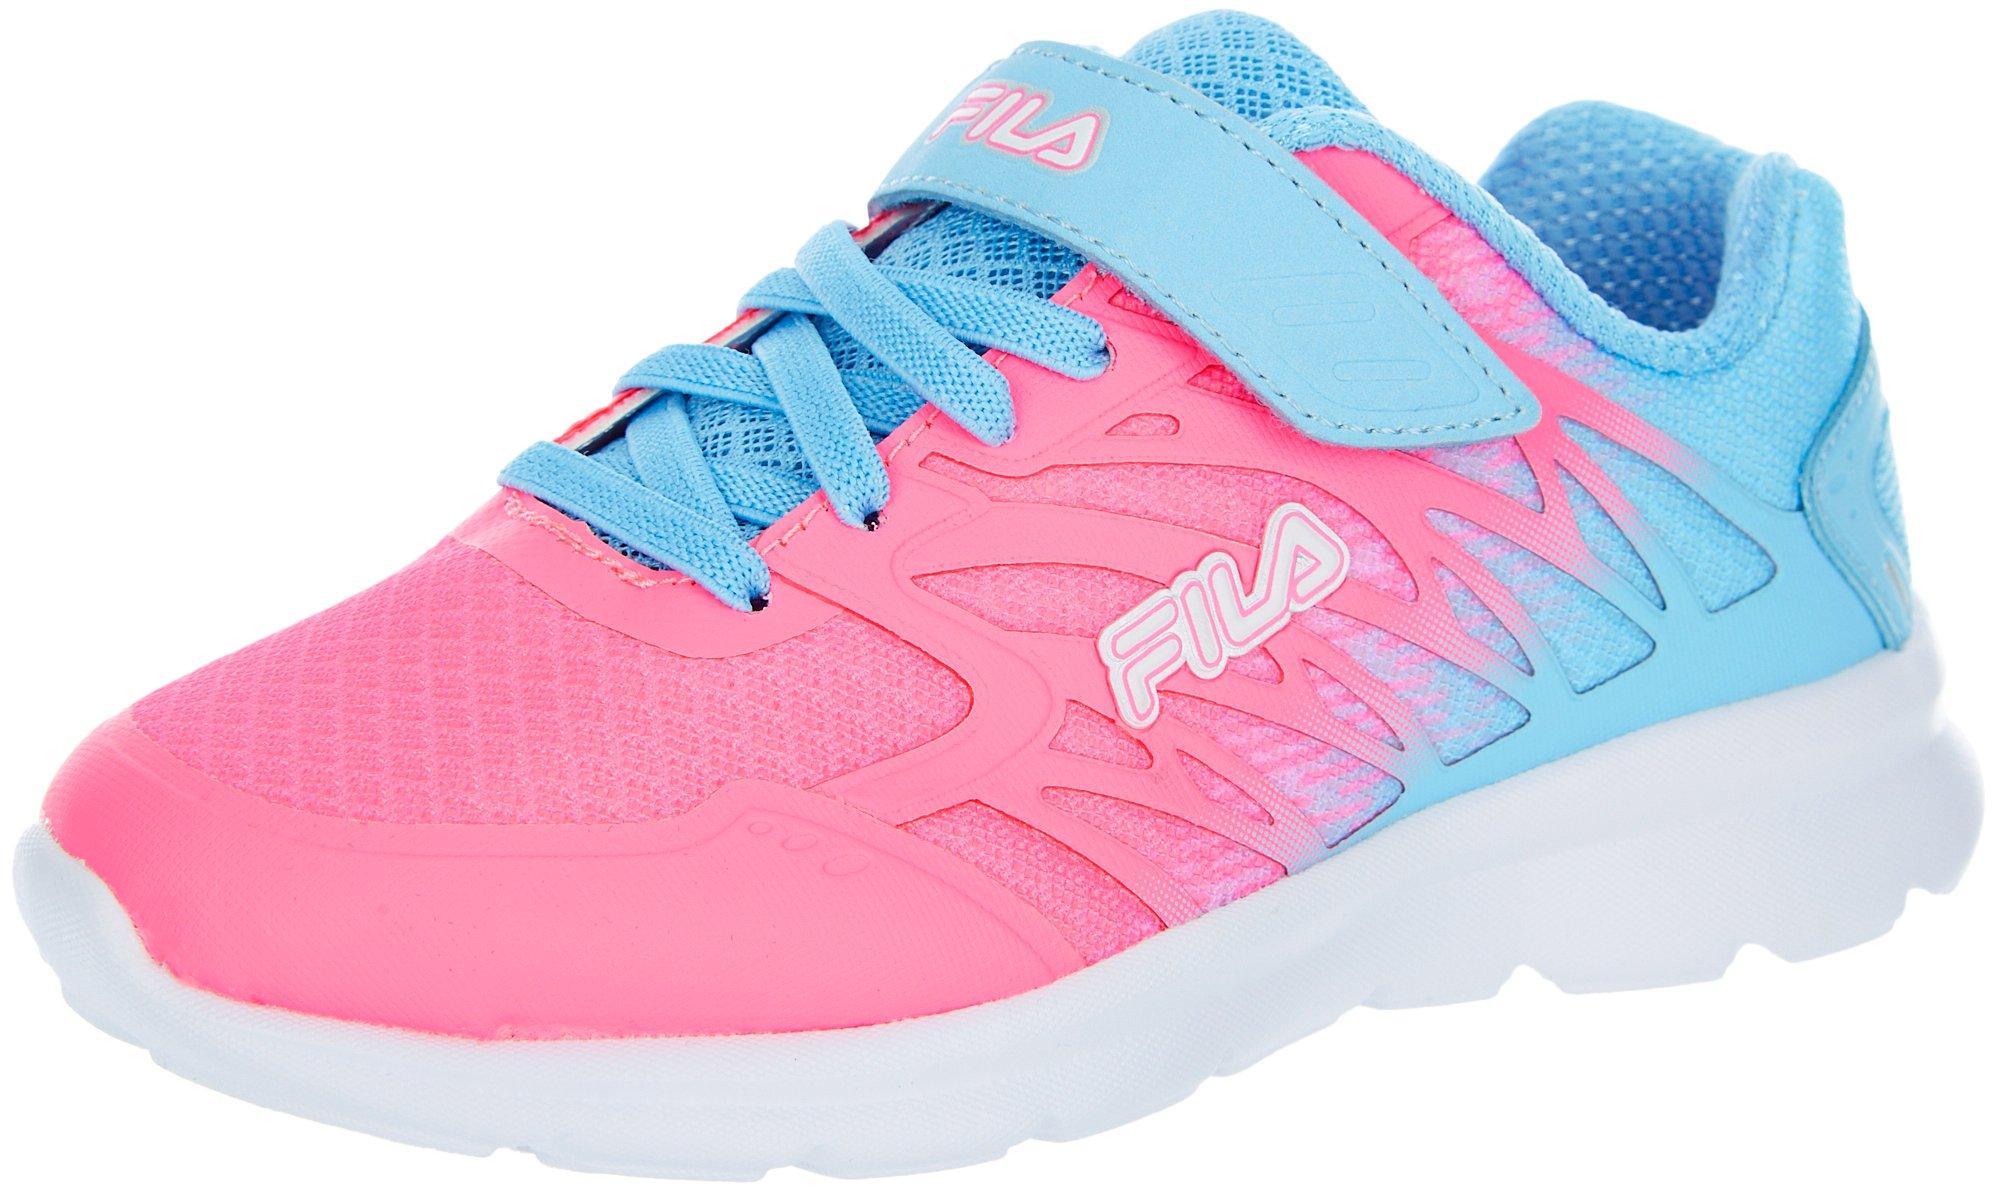 Girls Lightspin Athletic Shoes